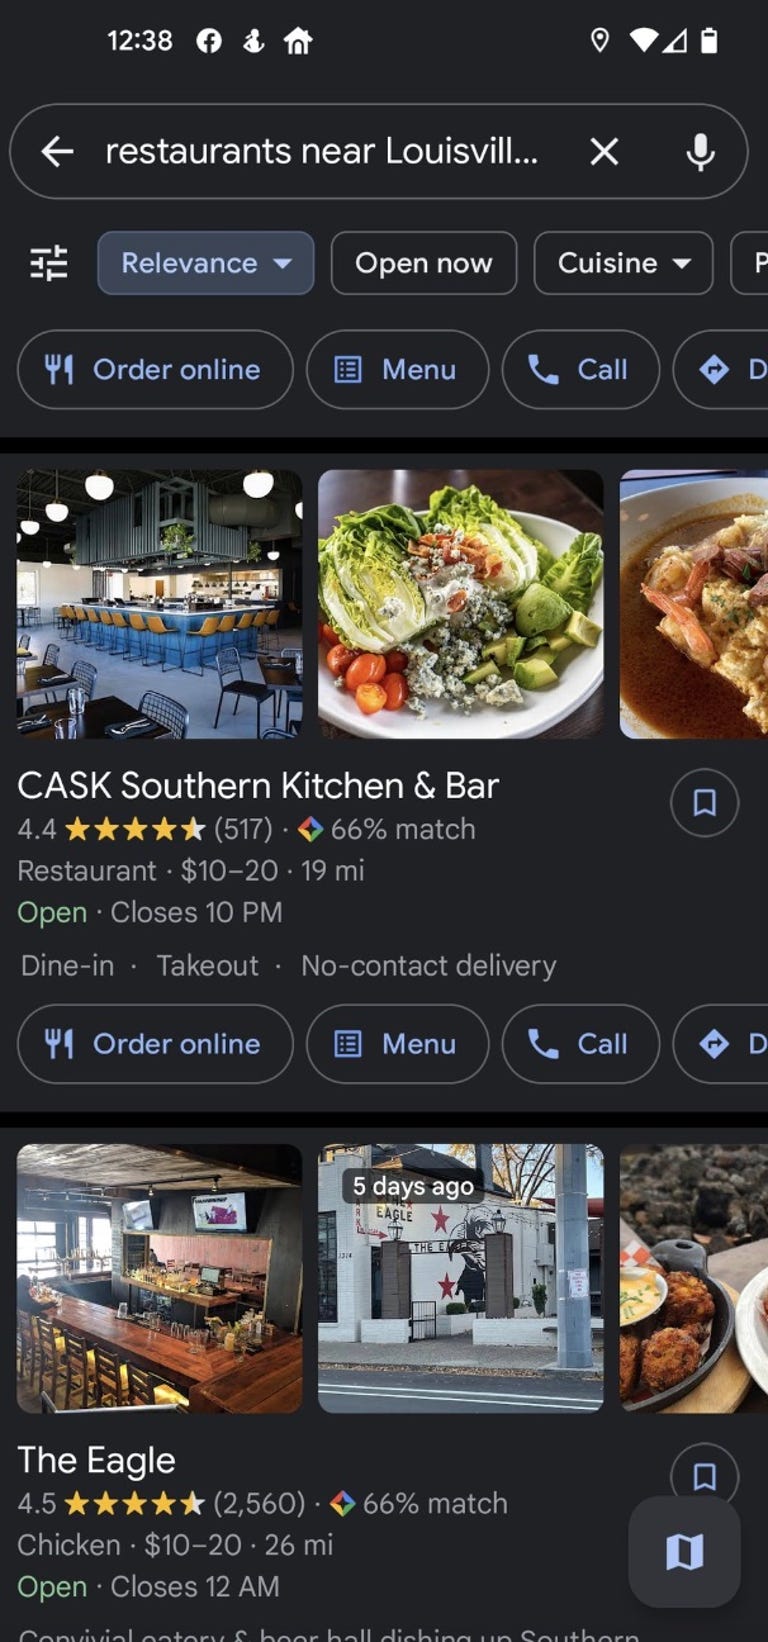 Personalized restaurant recommendations in Google Maps